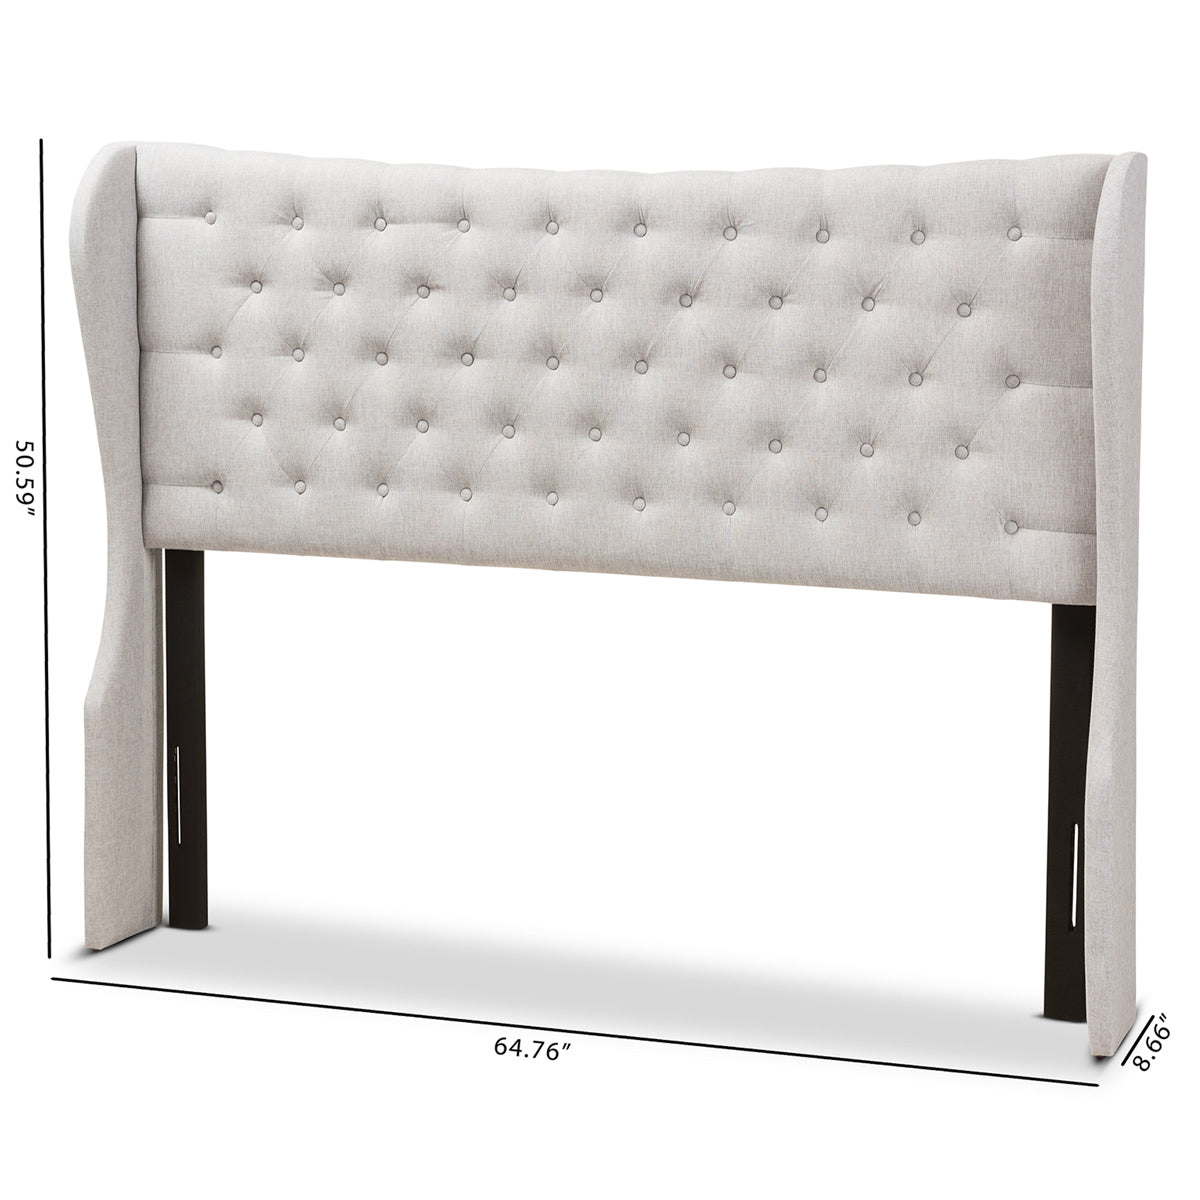 Baxton Studio Cadence Modern and Contemporary Greyish Beige Fabric Button-Tufted Queen Size Winged Headboard Baxton Studio-Headboards-Minimal And Modern - 6